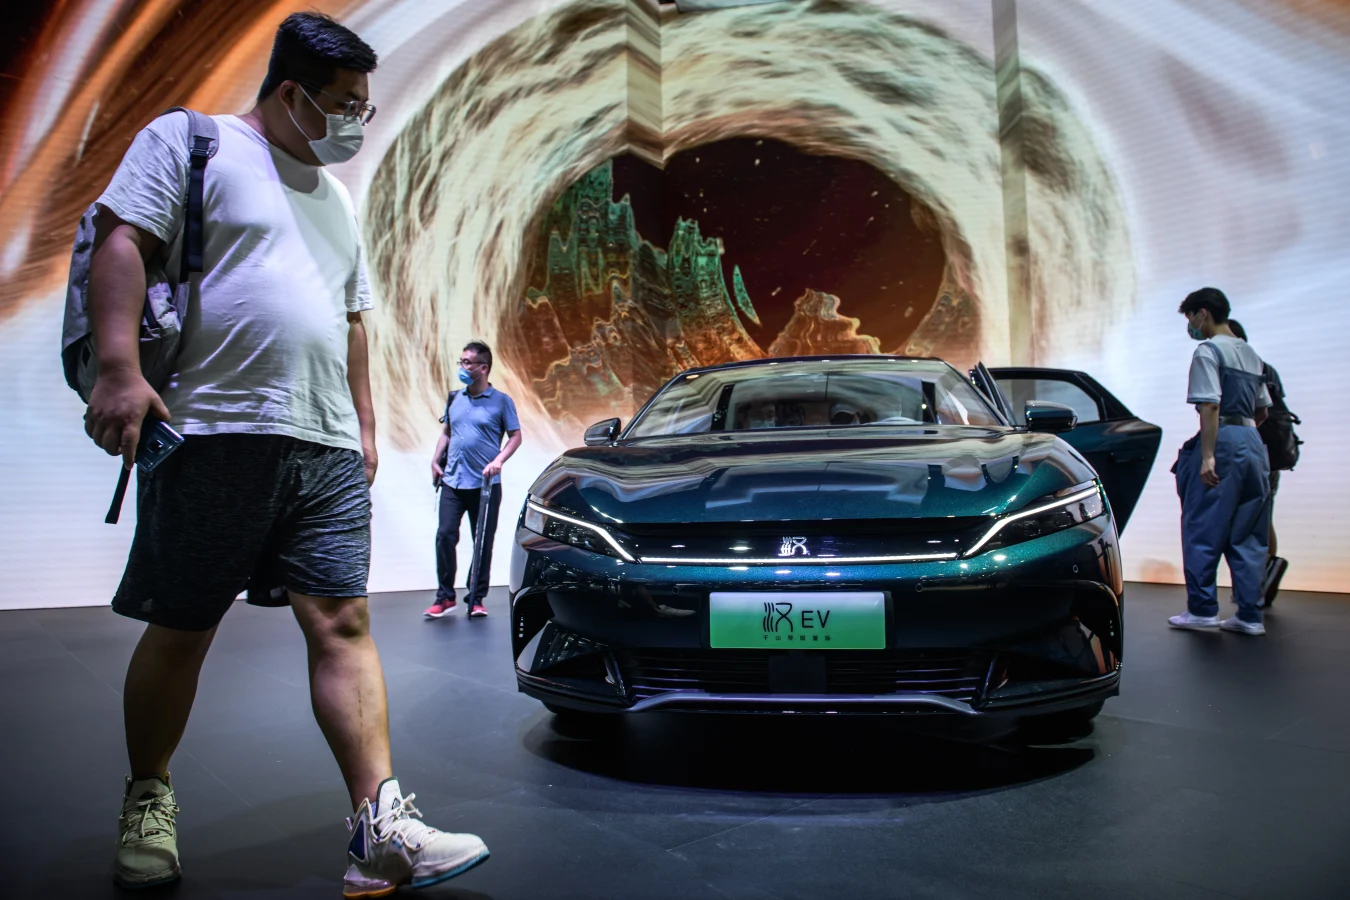 SHENZHEN, CHINA - JUNE 5:A BYD Han EV is on display during the Guangdong-Hong Kong-Macao Greater Bay Area International Auto Show 2022 at Shenzhen Convention and Exhibition Center on June 5, 2022 in Shenzhen, Guangdong Province of China. (Photo by Stringer/Anadolu Agency via Getty Images)